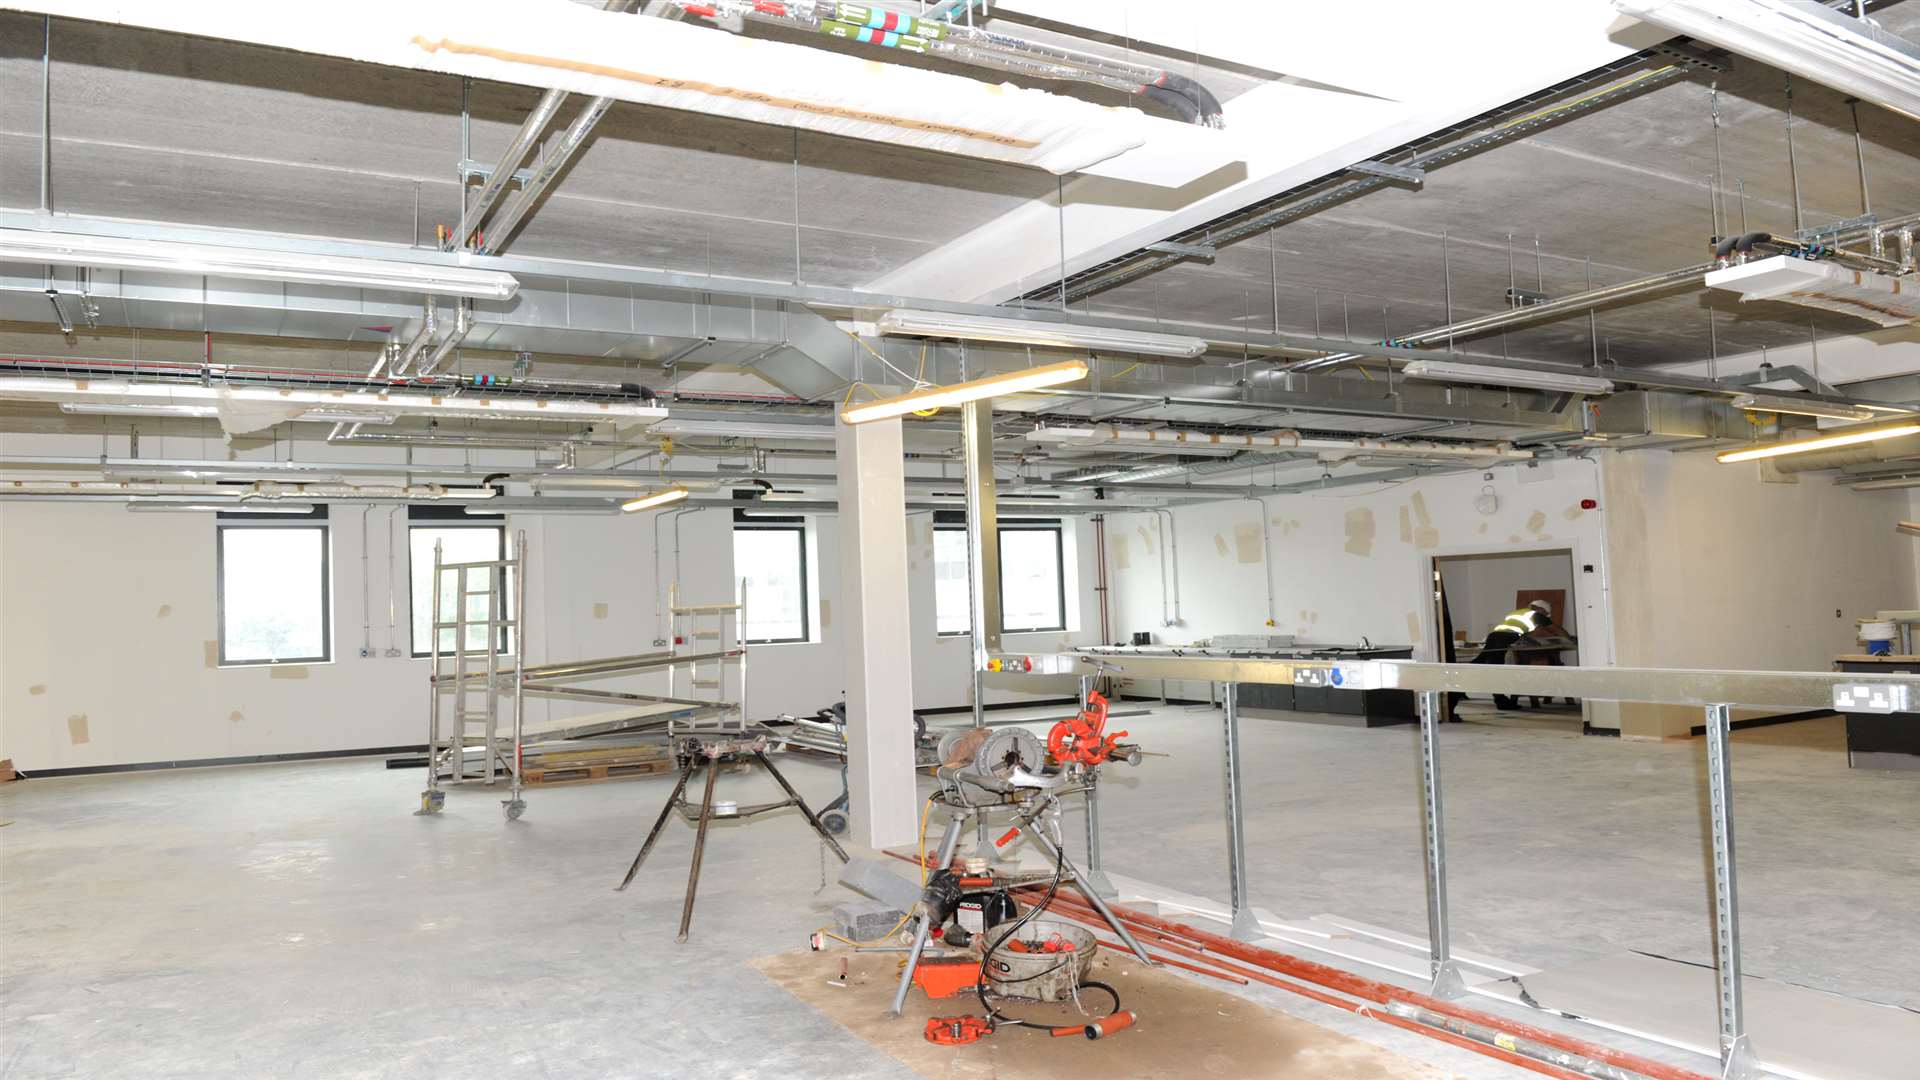 One of the classrooms under construction at Medway UTC